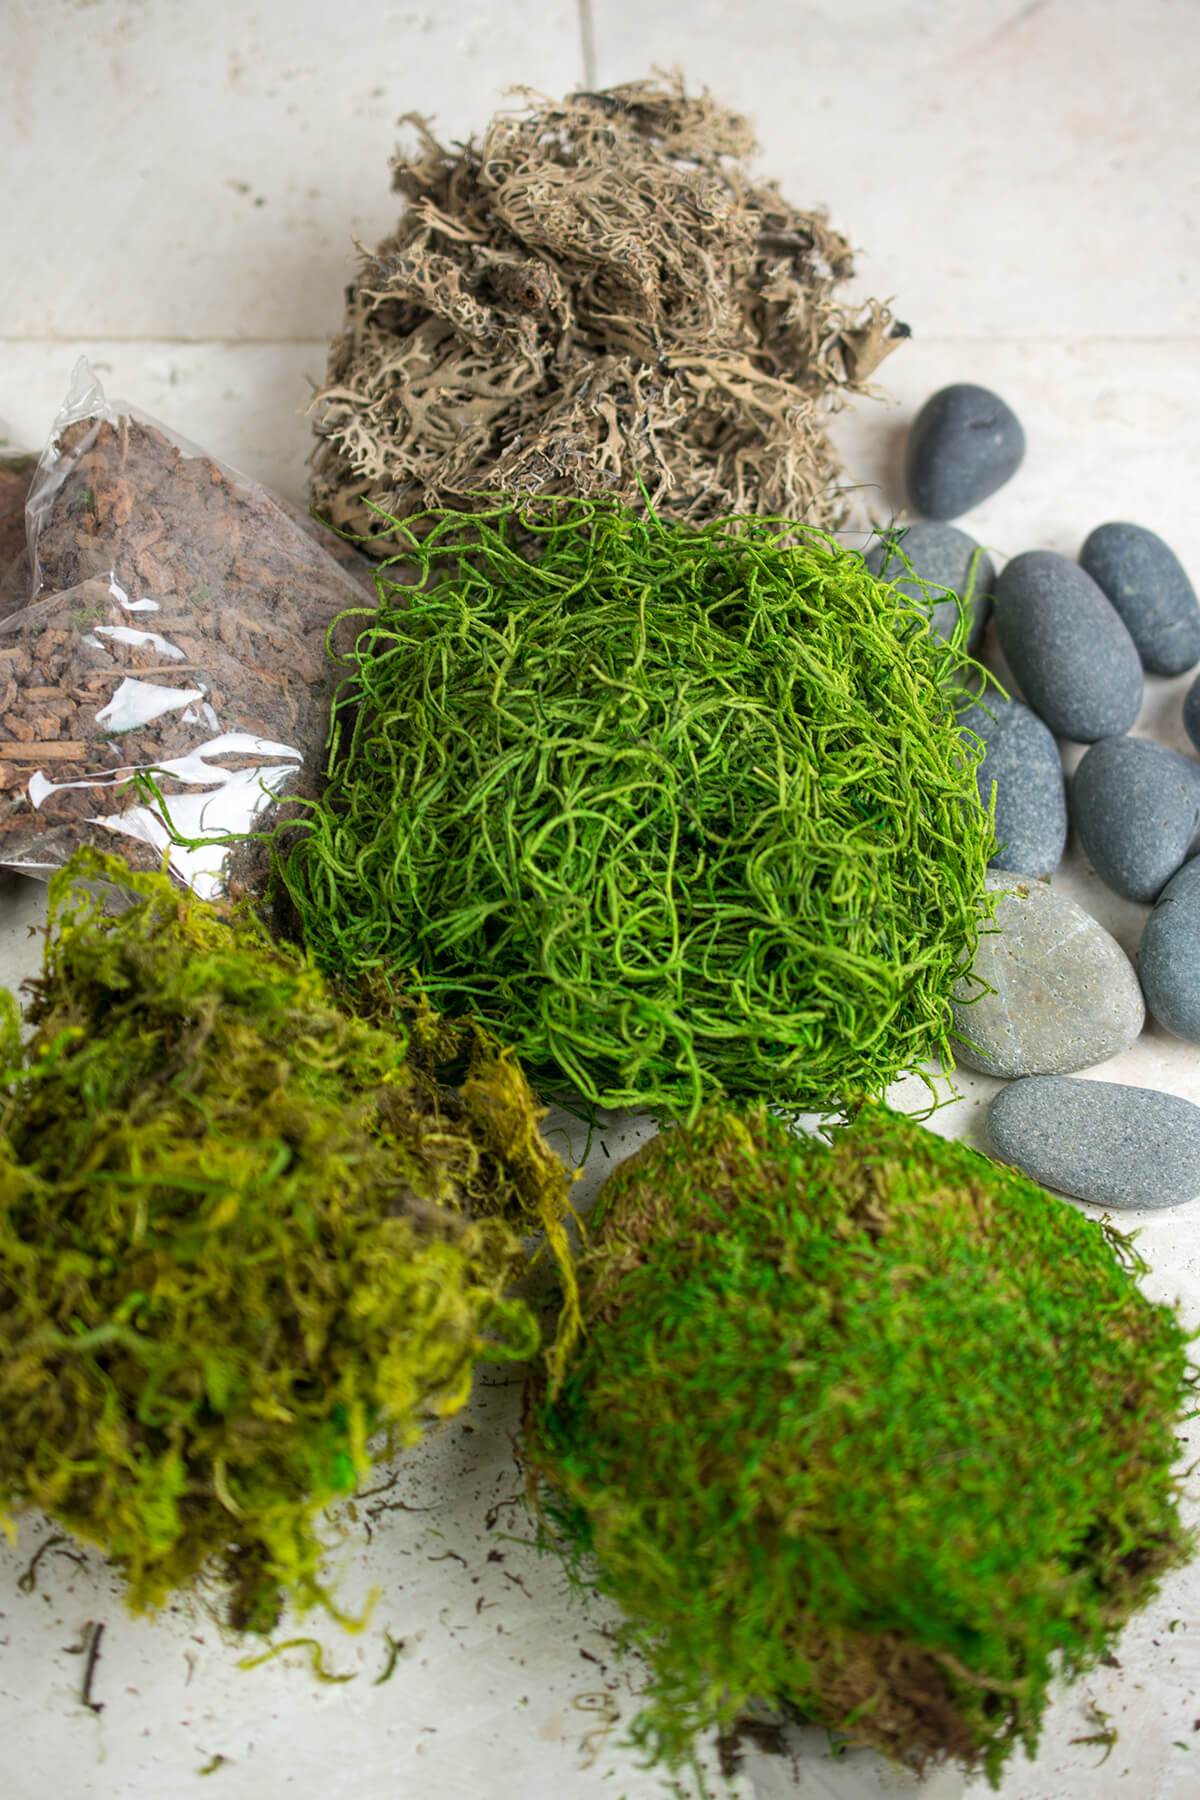 Terrarium Kit with Bark, Stones, Lichen, and Moss - Quick Candles